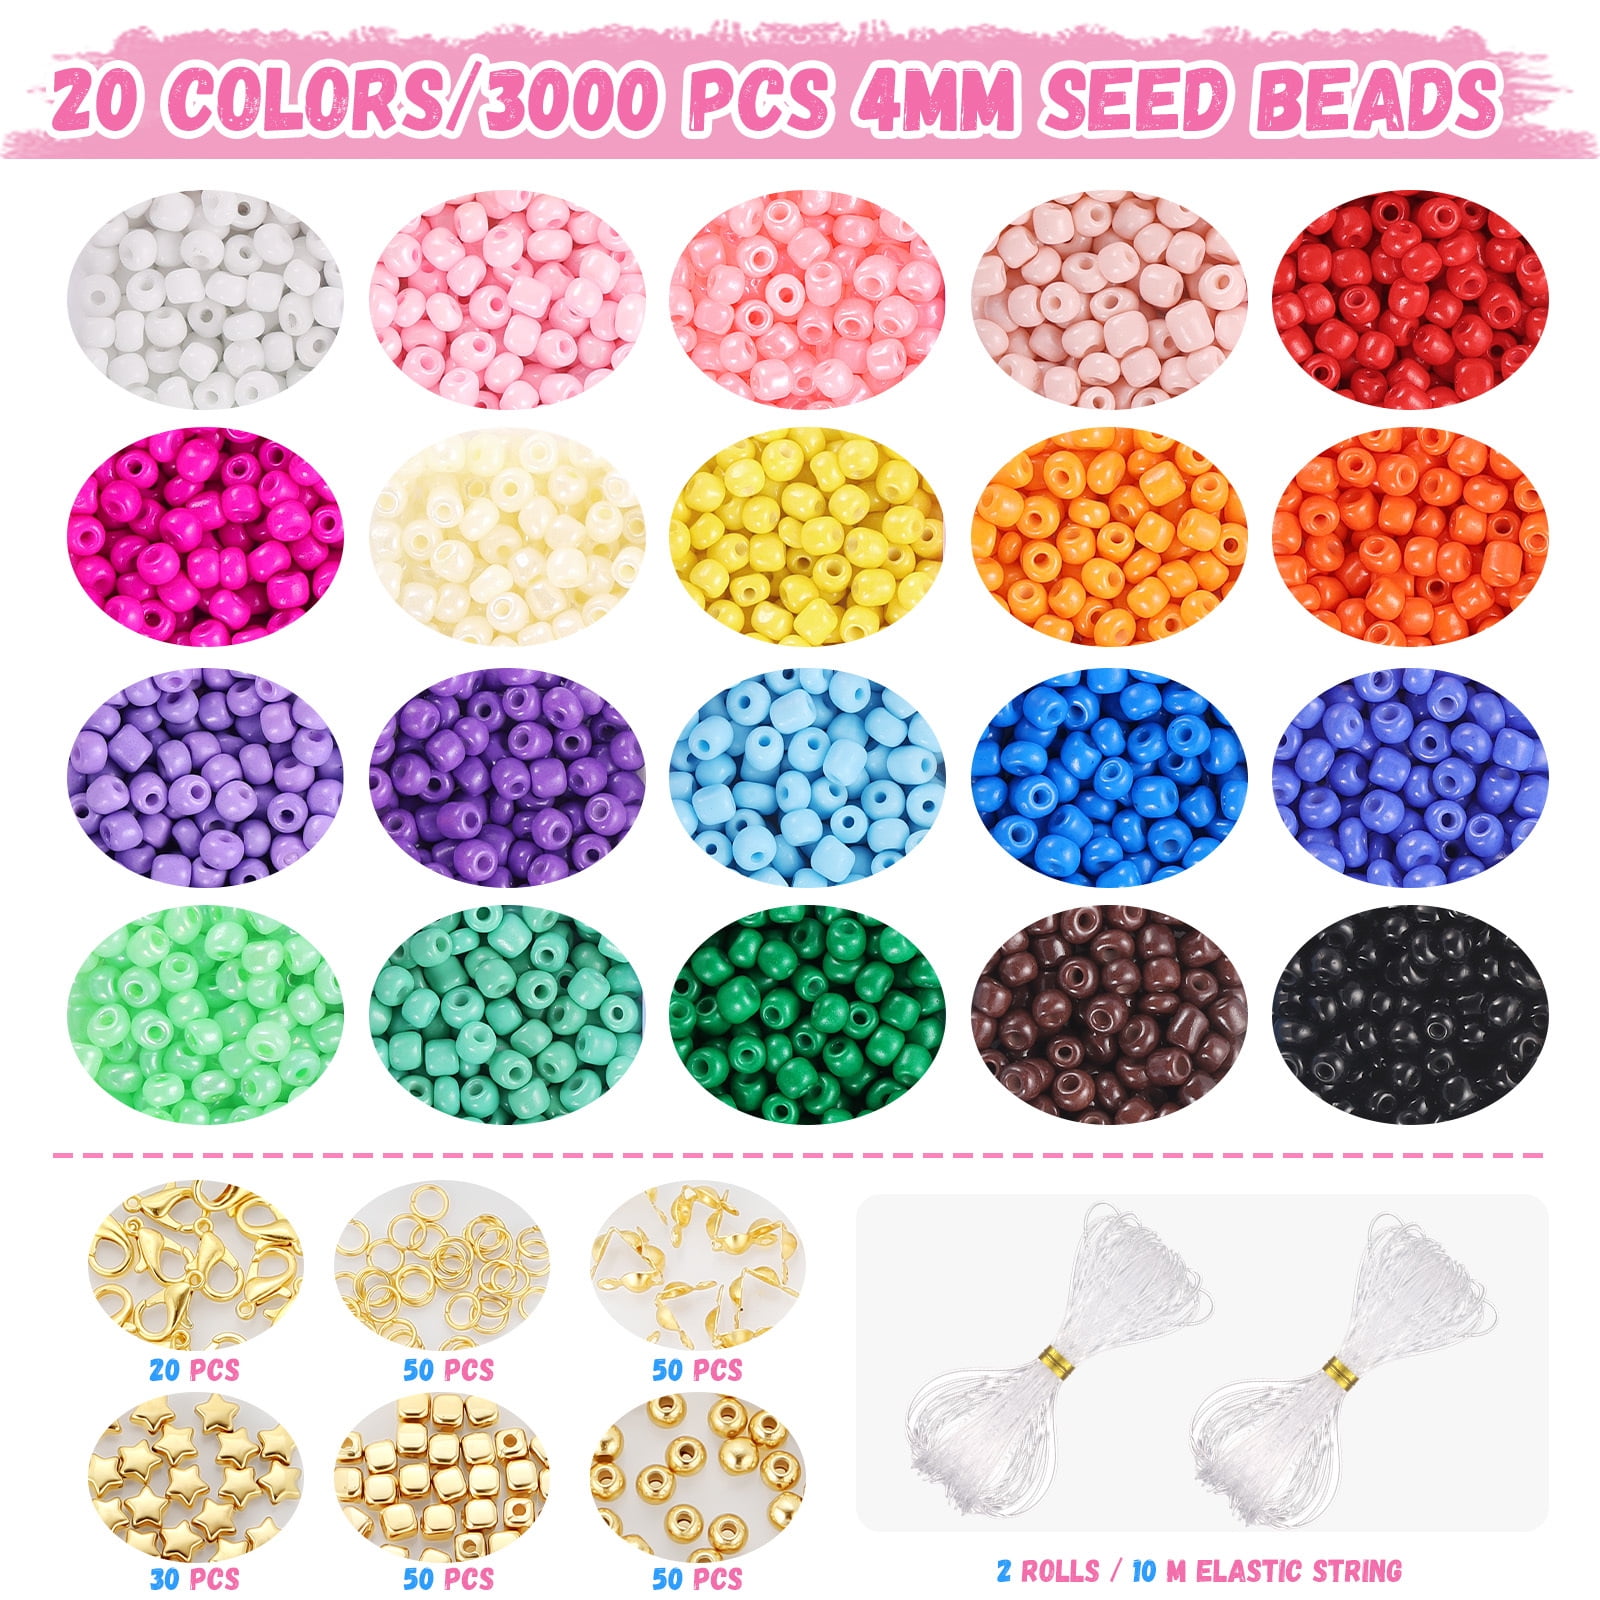 Funtopia 4mm 13000pcs+ Seed Beads for Jewelry Making, 120 Colors Small  Glass Beads for Bracelets, Friendship Bracelet Kit with Alphabet Letter  Beads 